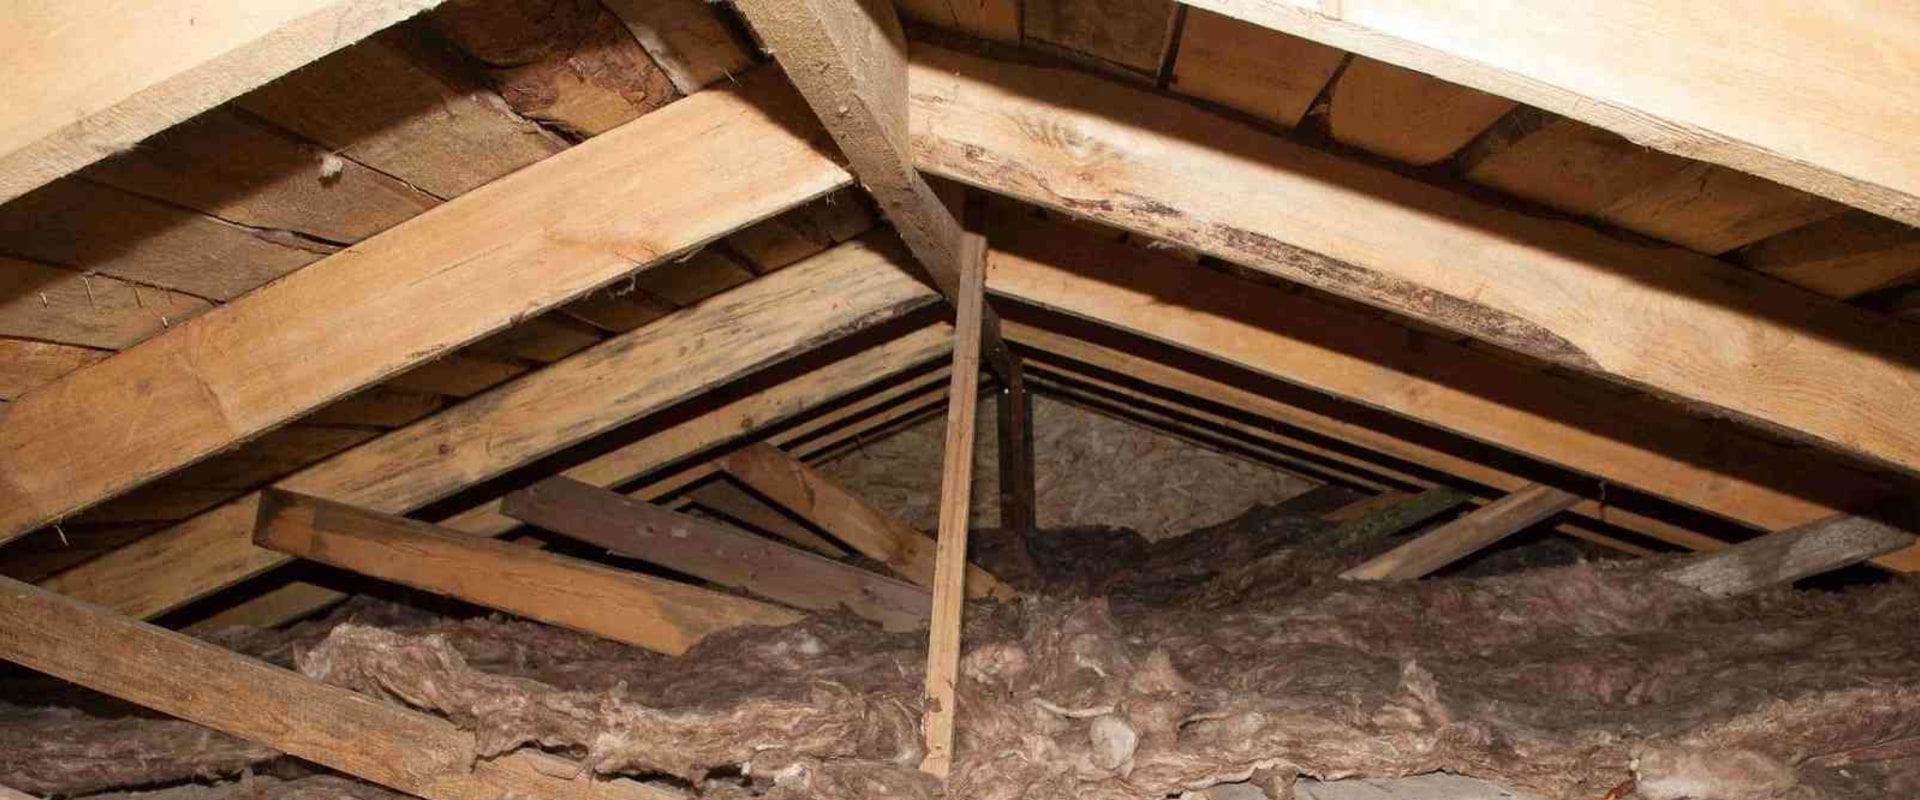 Can I Install Additional Insulation in My Attic Without Damaging It?